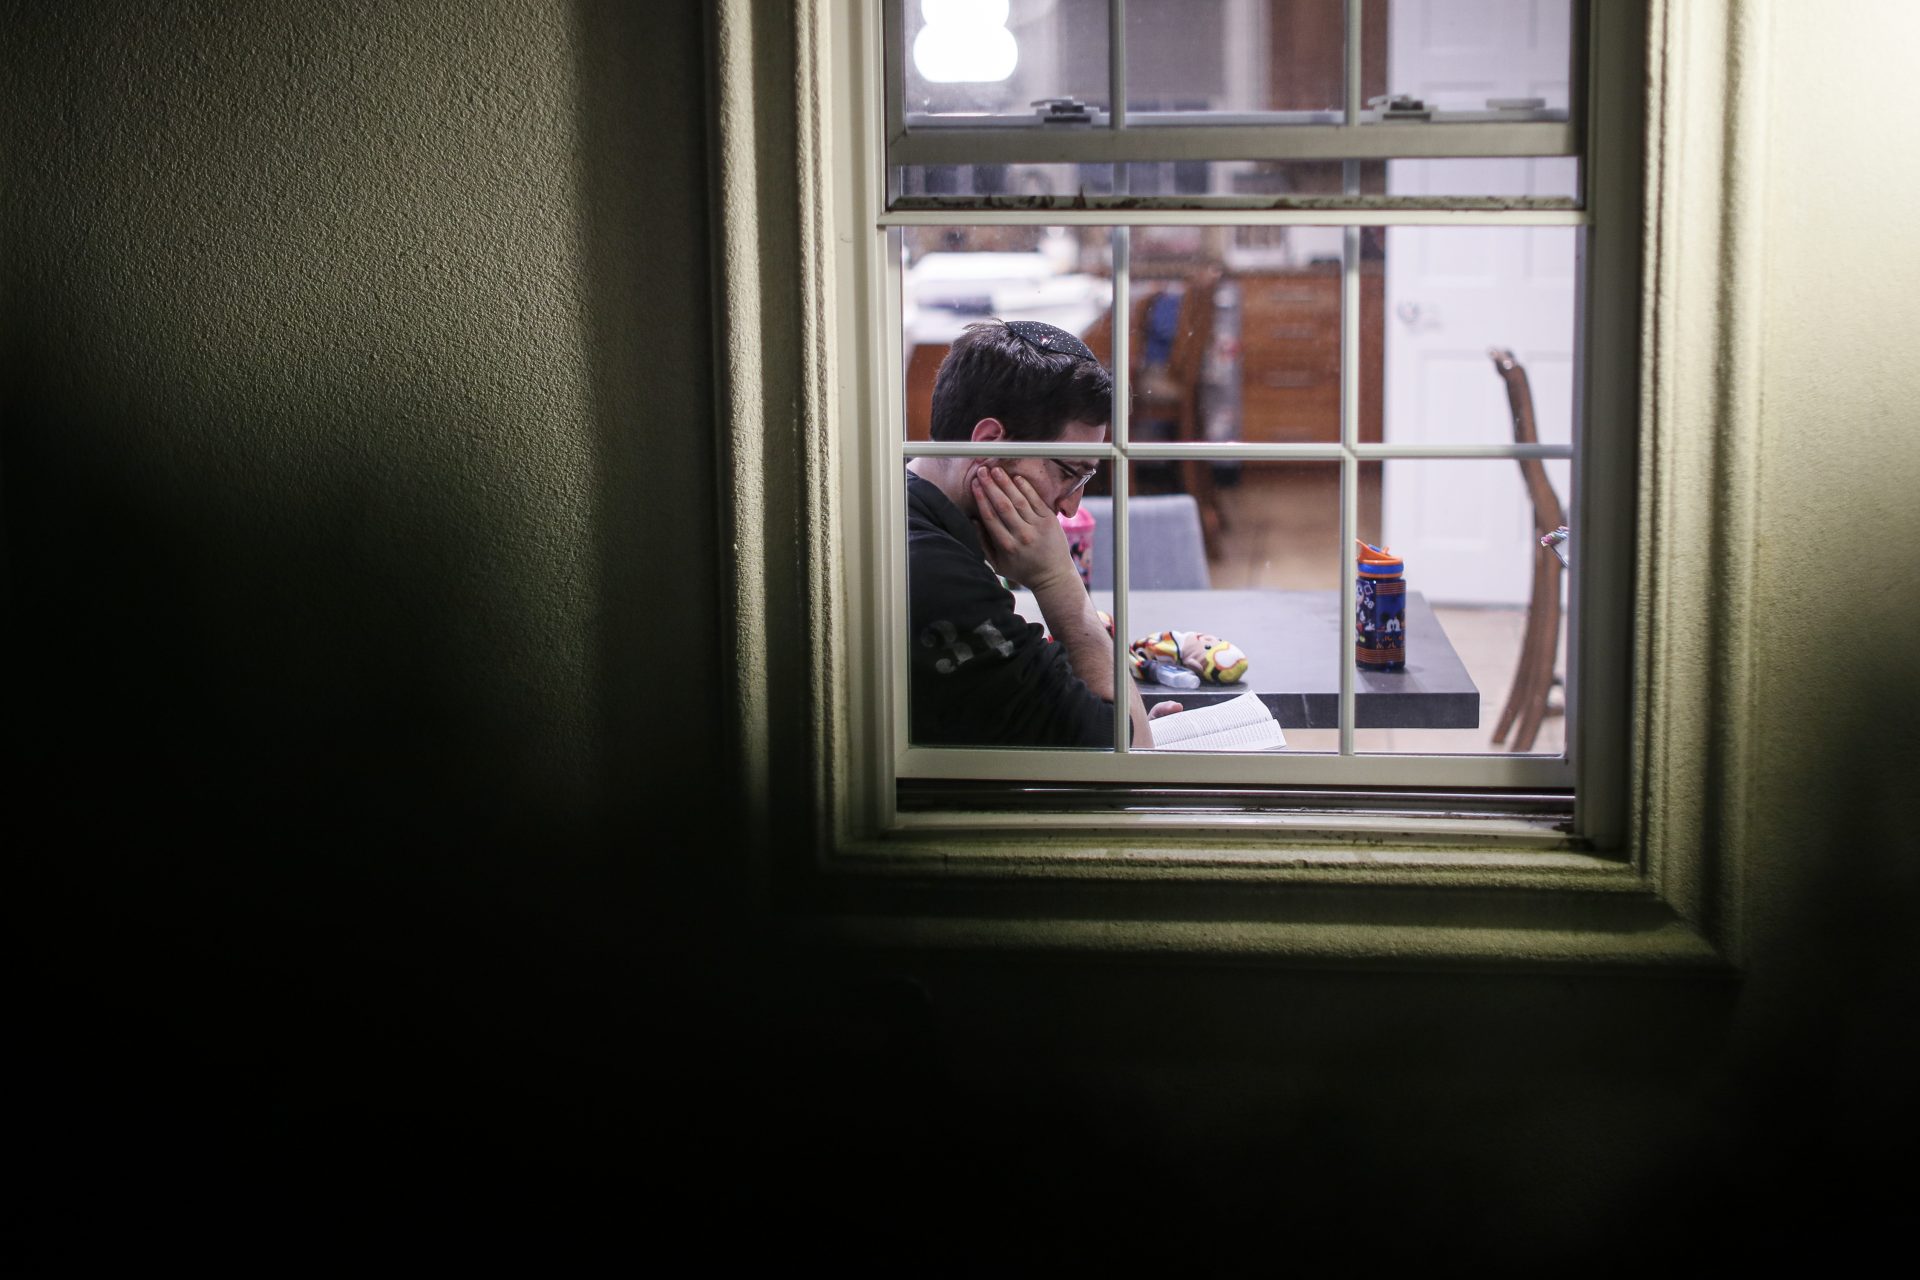 FILE PHOTO: A self-quarantined resident who says he tested positive for COVID-19 listens beside his window as volunteers perform a Purim reading from the Book of Esther, Monday, March 9, 2020, in New Rochelle, N.Y.